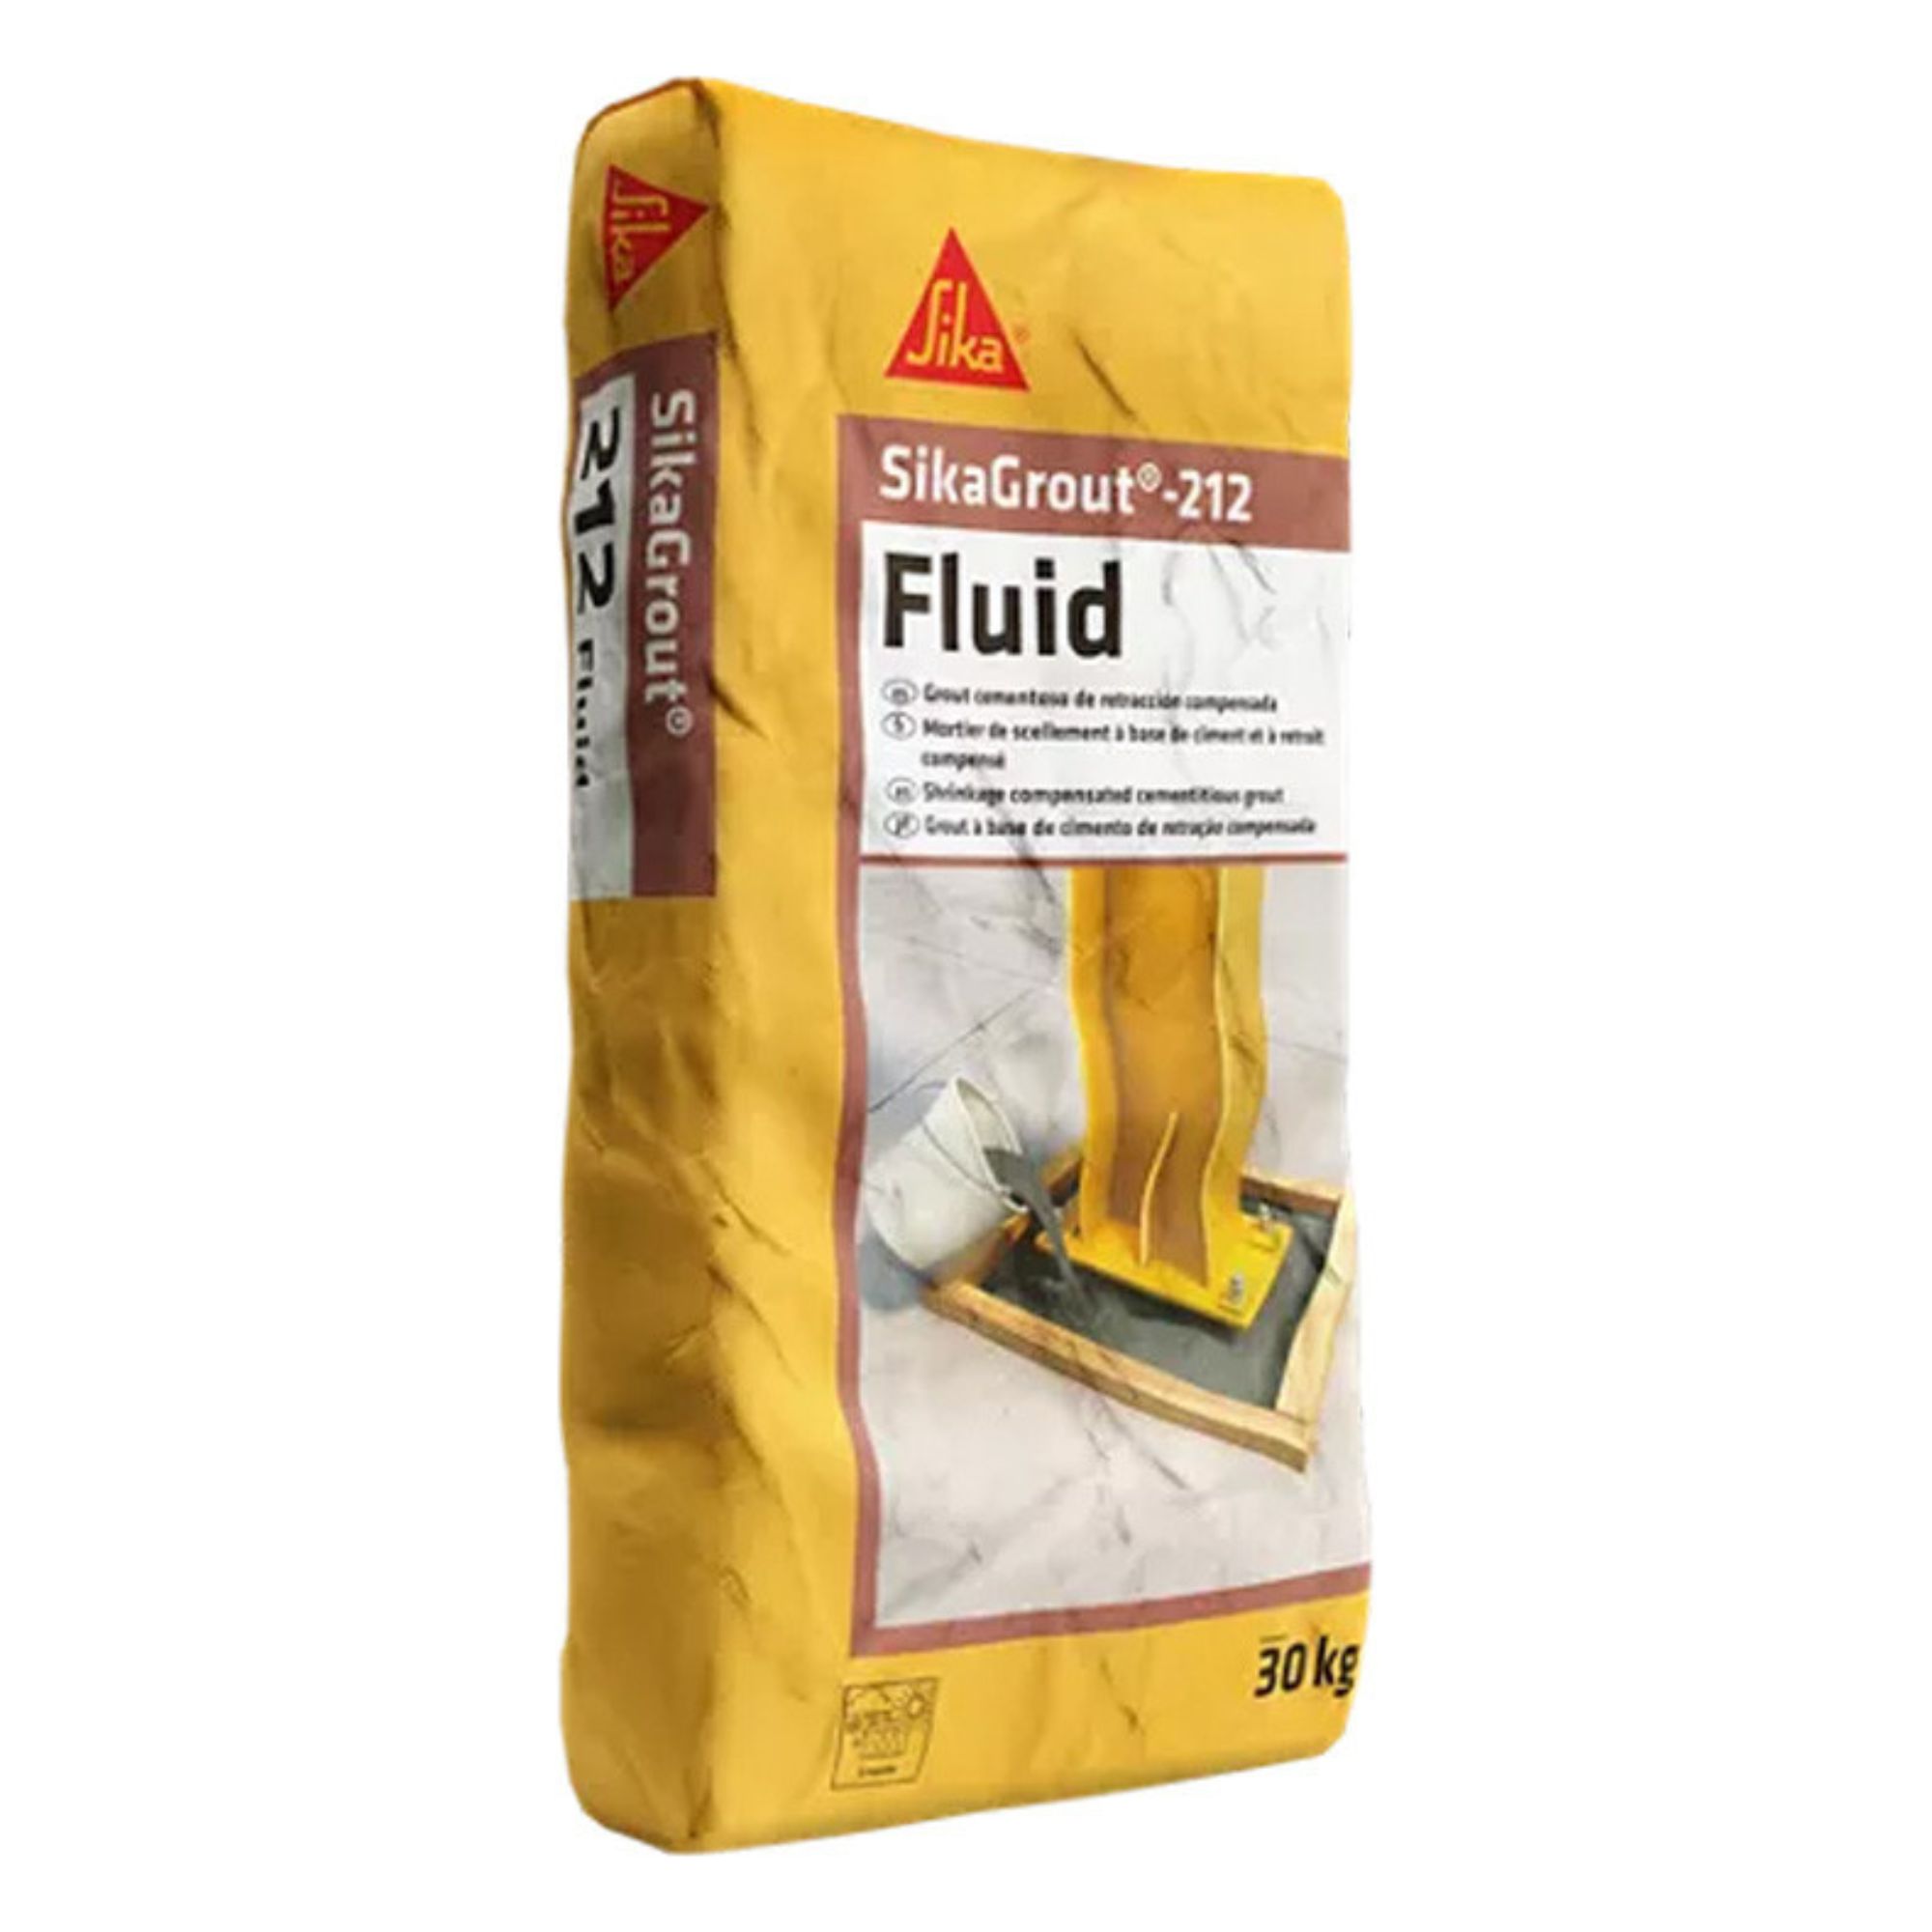 Sika grout 212 fluid 30kg Sika